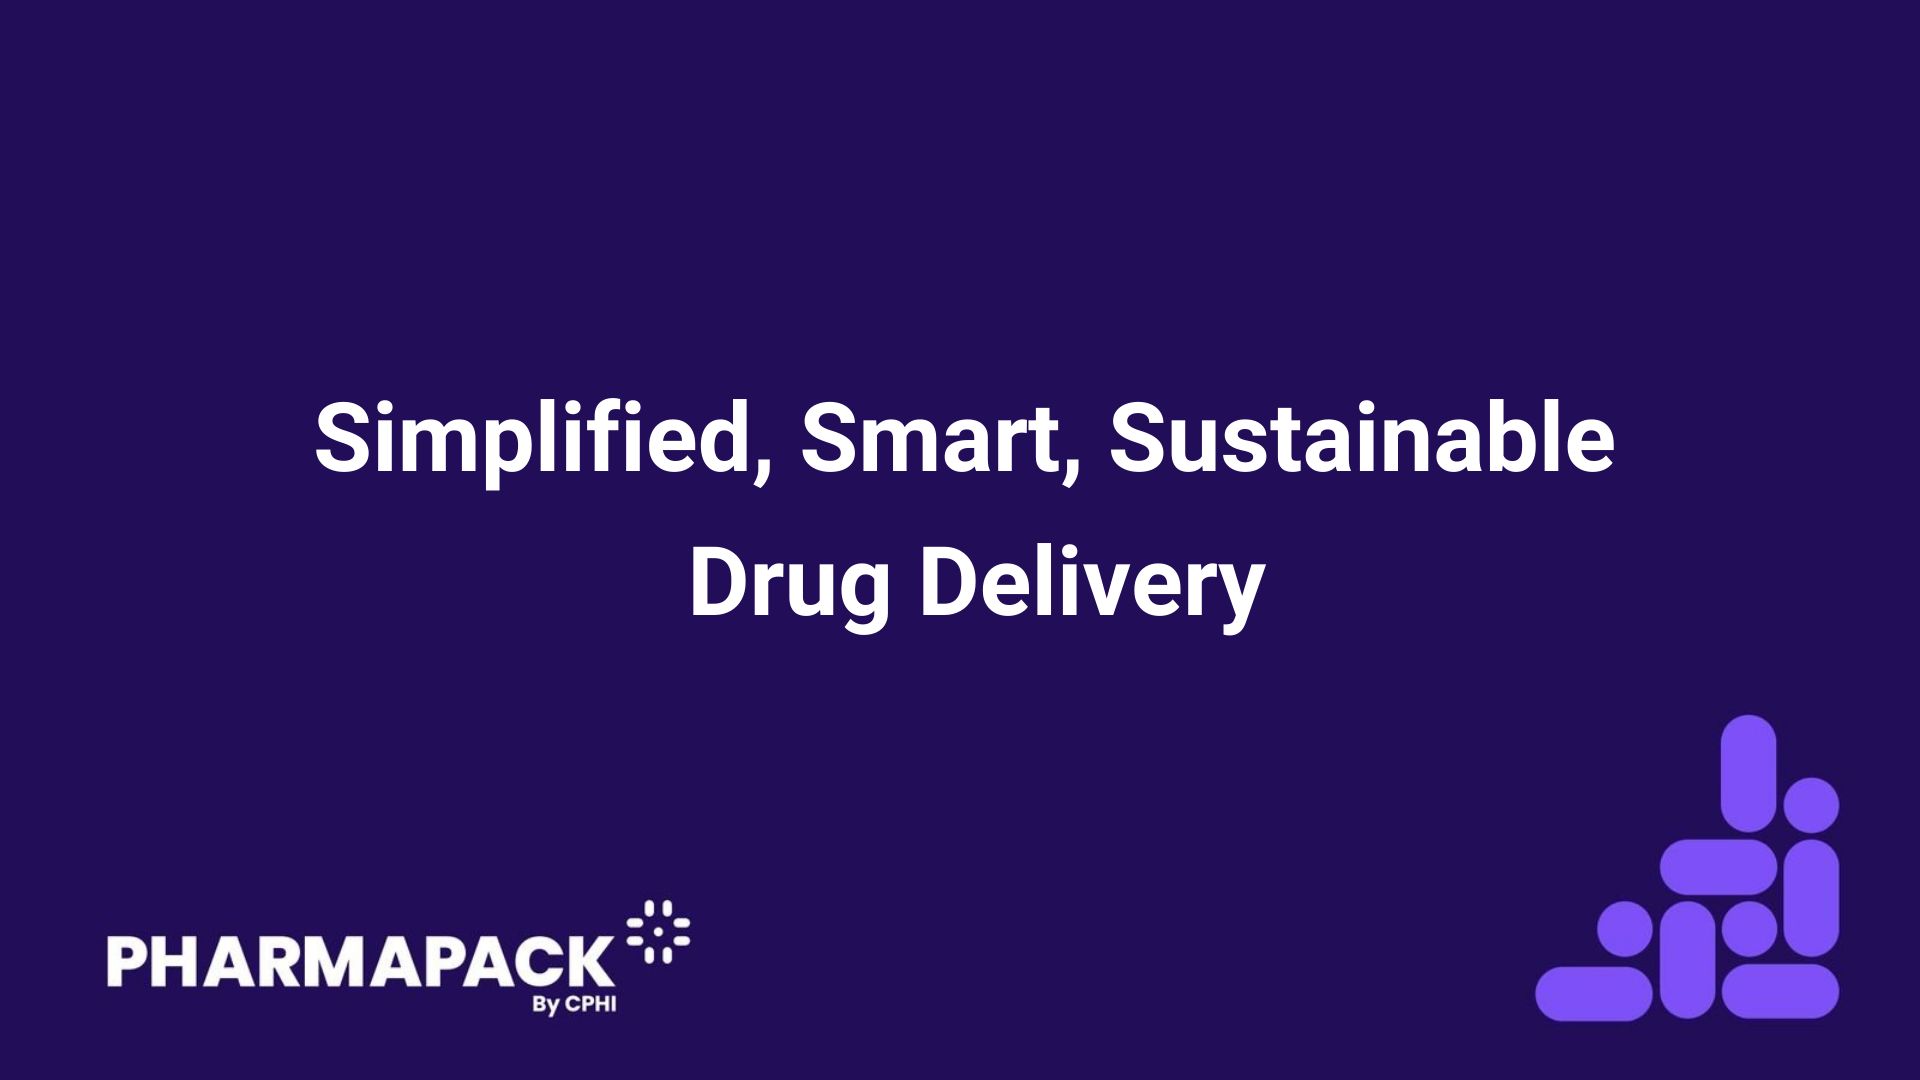 Simplified, Smart, Sustainable Drug Delivery